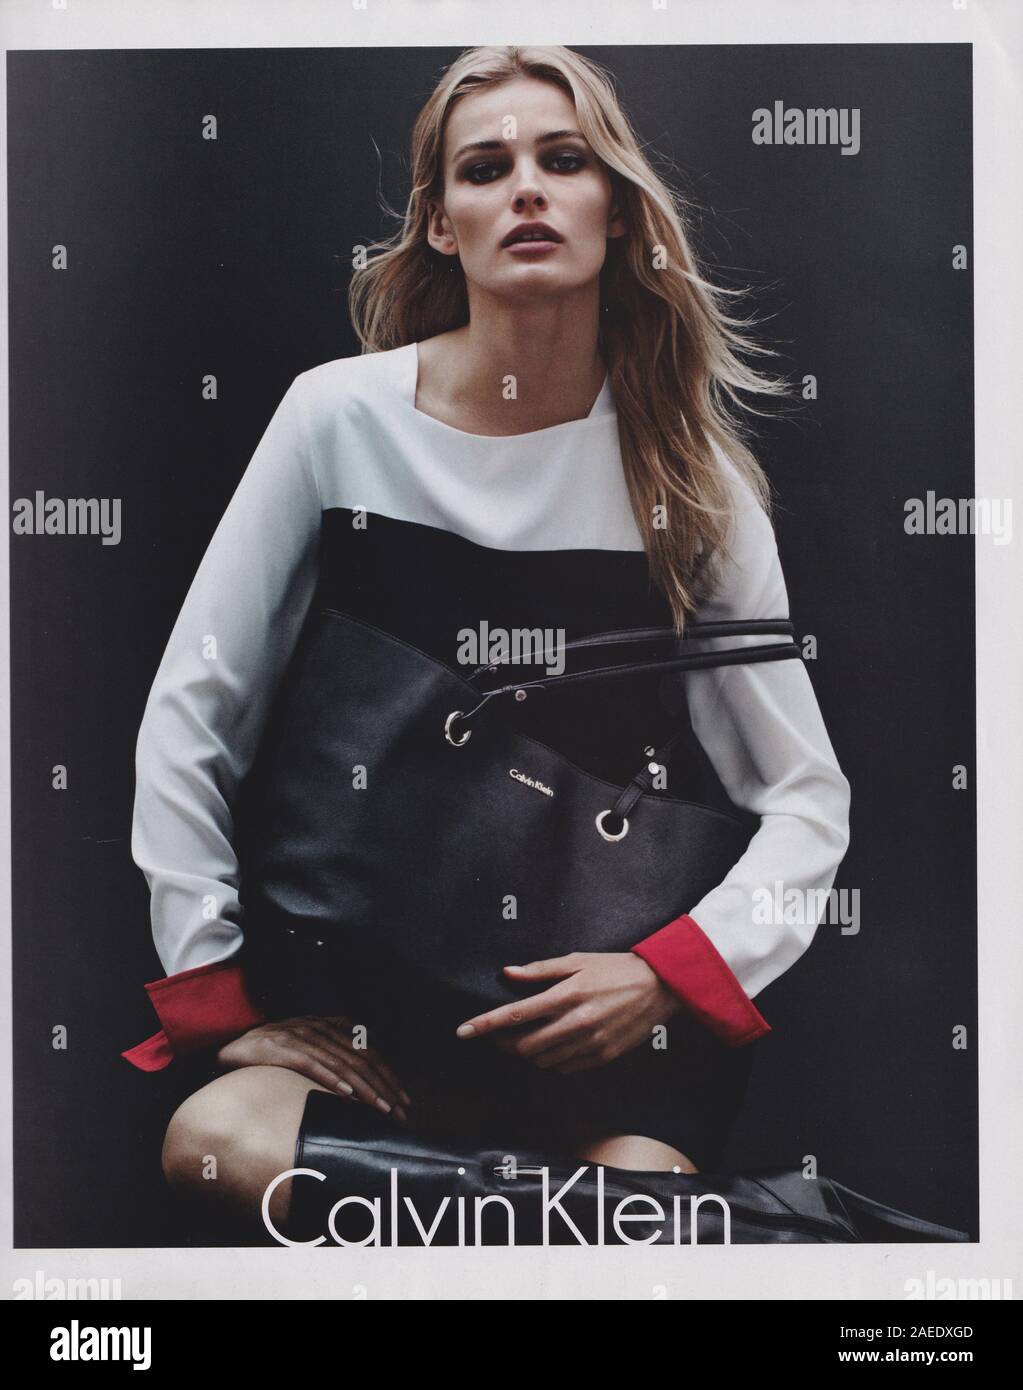 poster advertising Calvin Klein fashion house with Edita Vilkeviciute,  paper magazine from 2012, CK advertisement, creative Calvin Klein 2010s  advert Stock Photo - Alamy